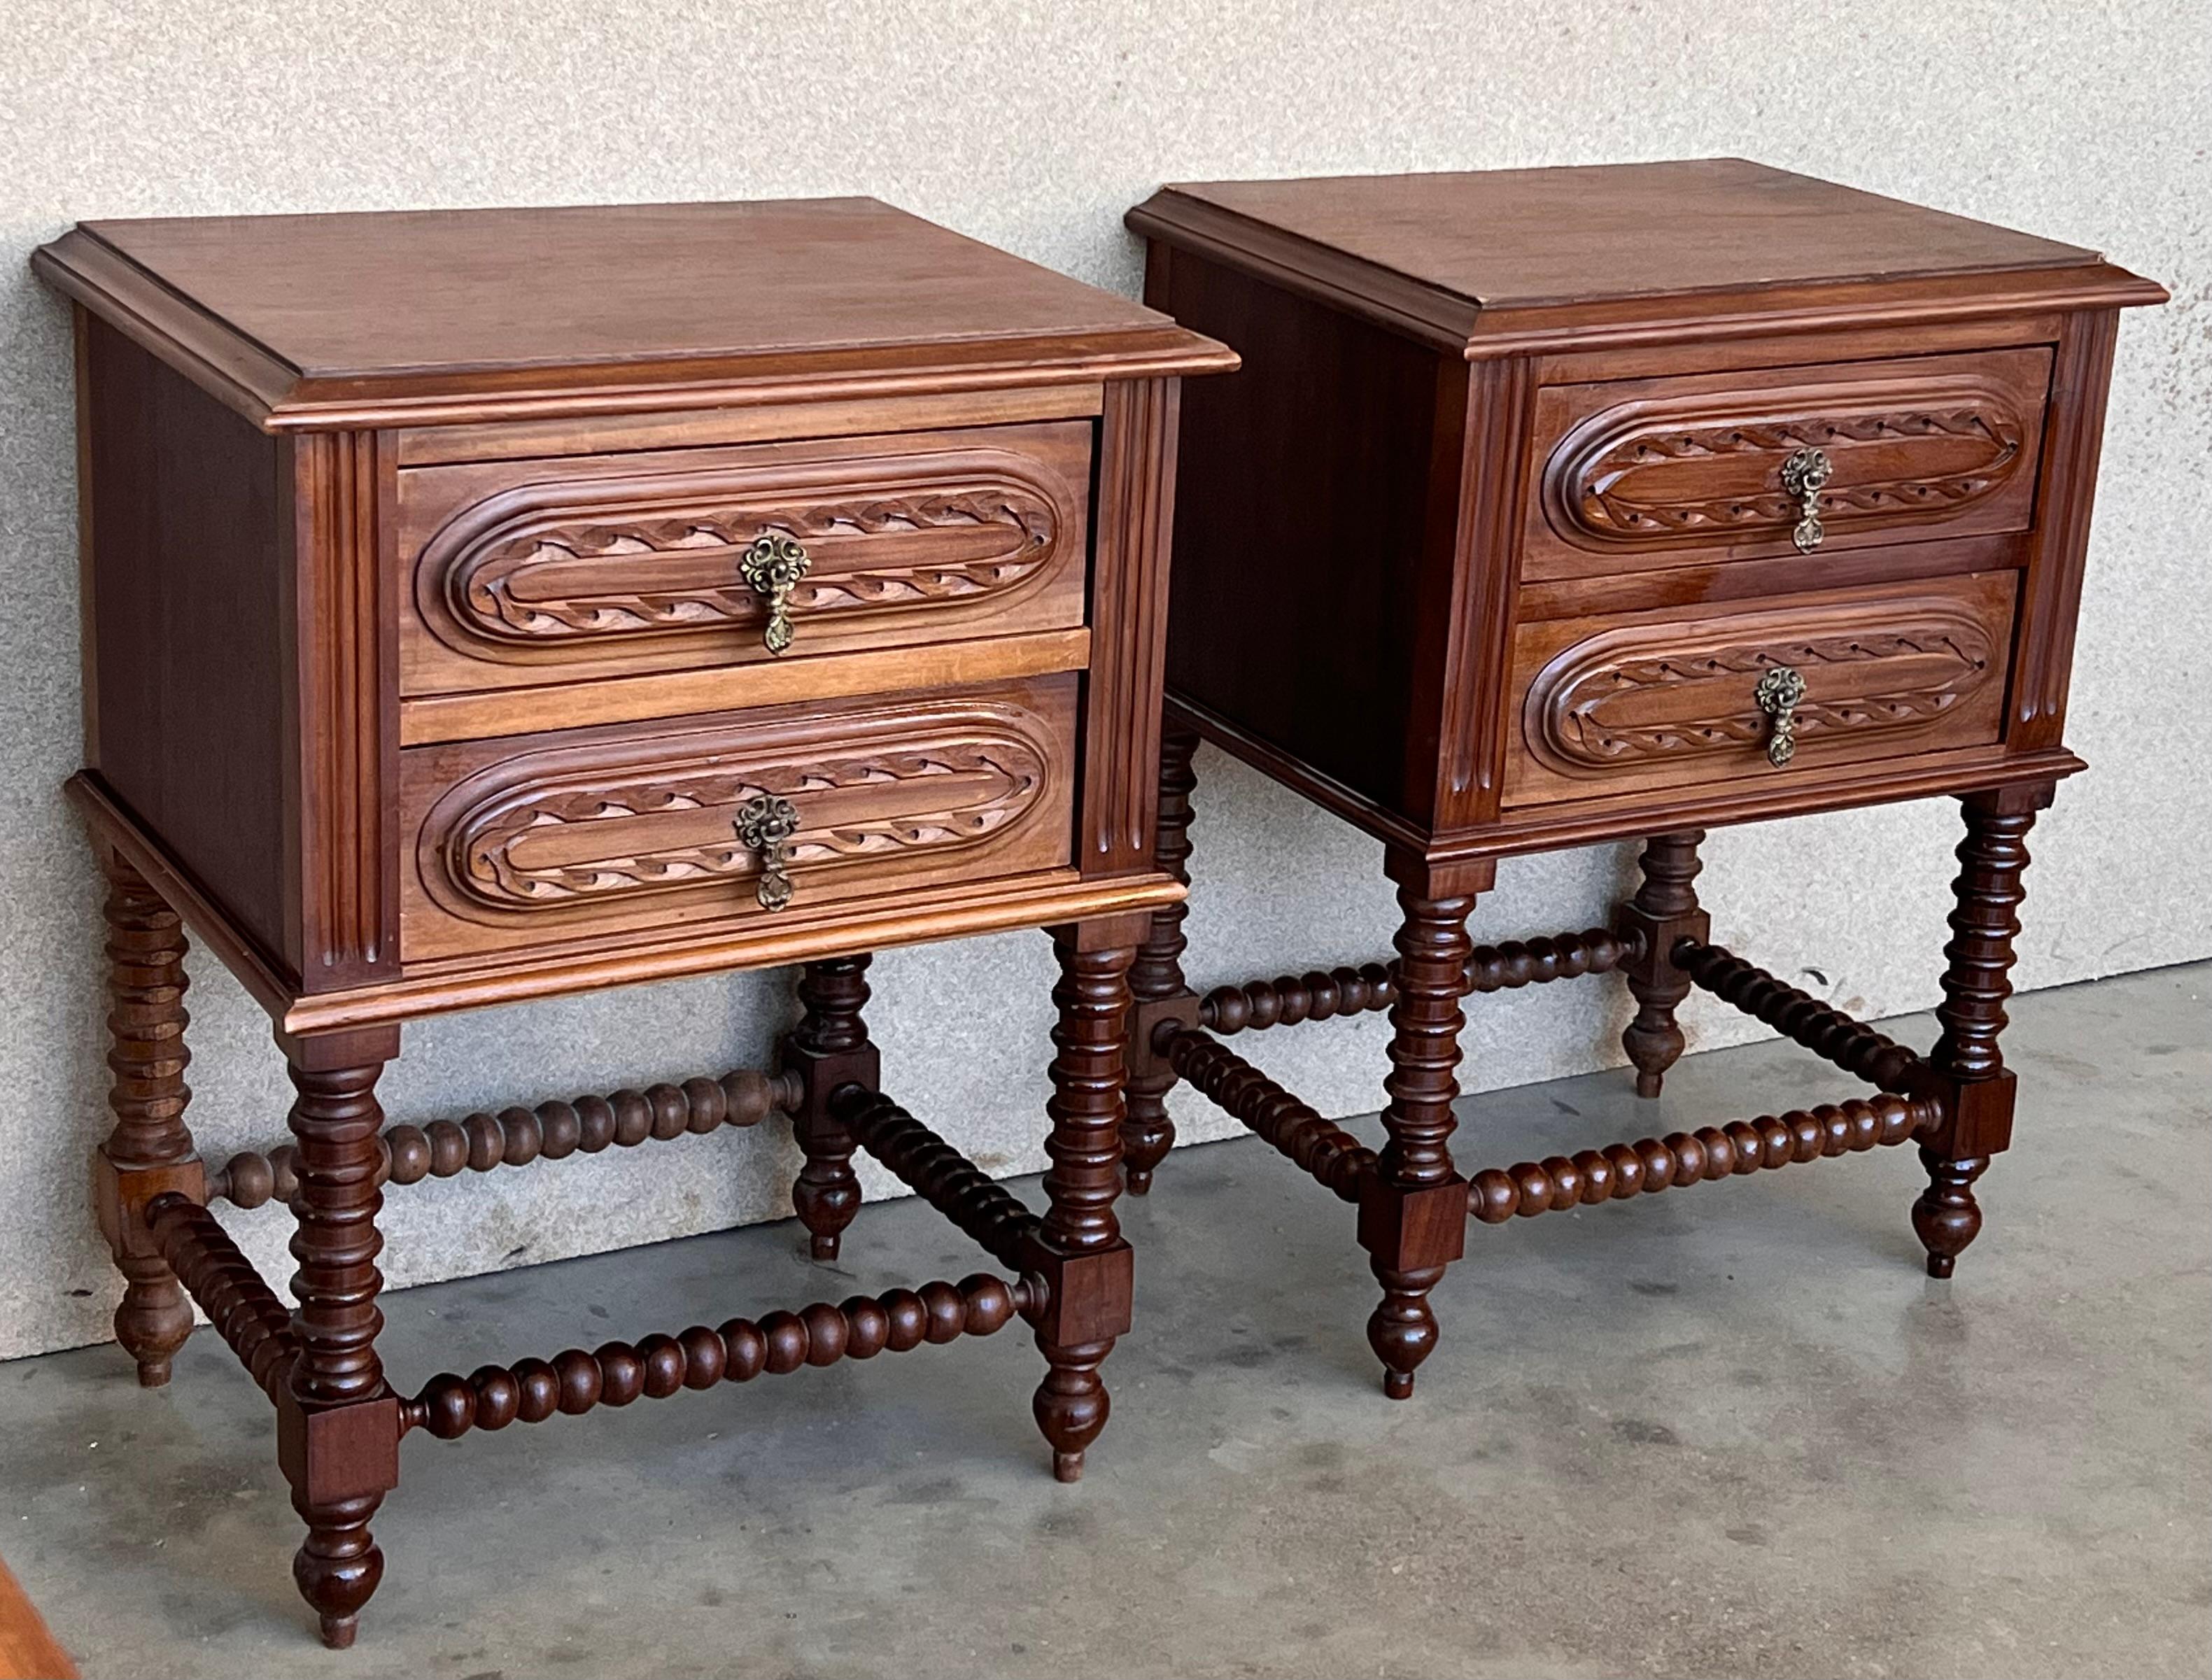 French Provincial Pair of French Chestnut Bedside Nightstands with Two Drawers, Late 19th Century